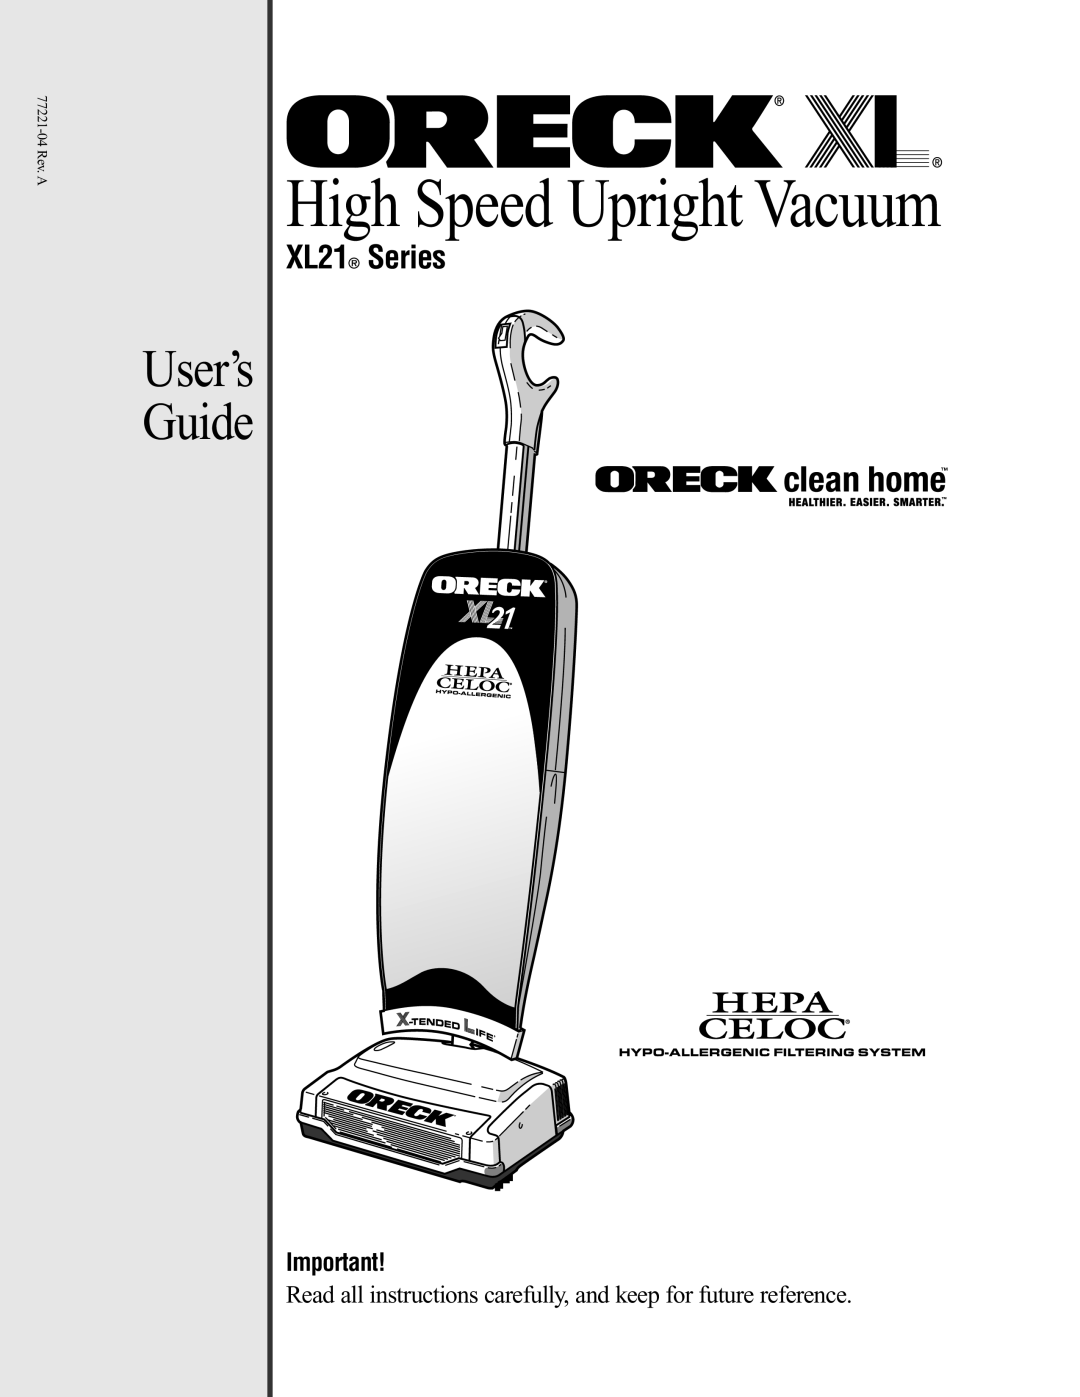 Oreck manual User’s Guide, XL21 Series, High Speed Upright Vacuum 